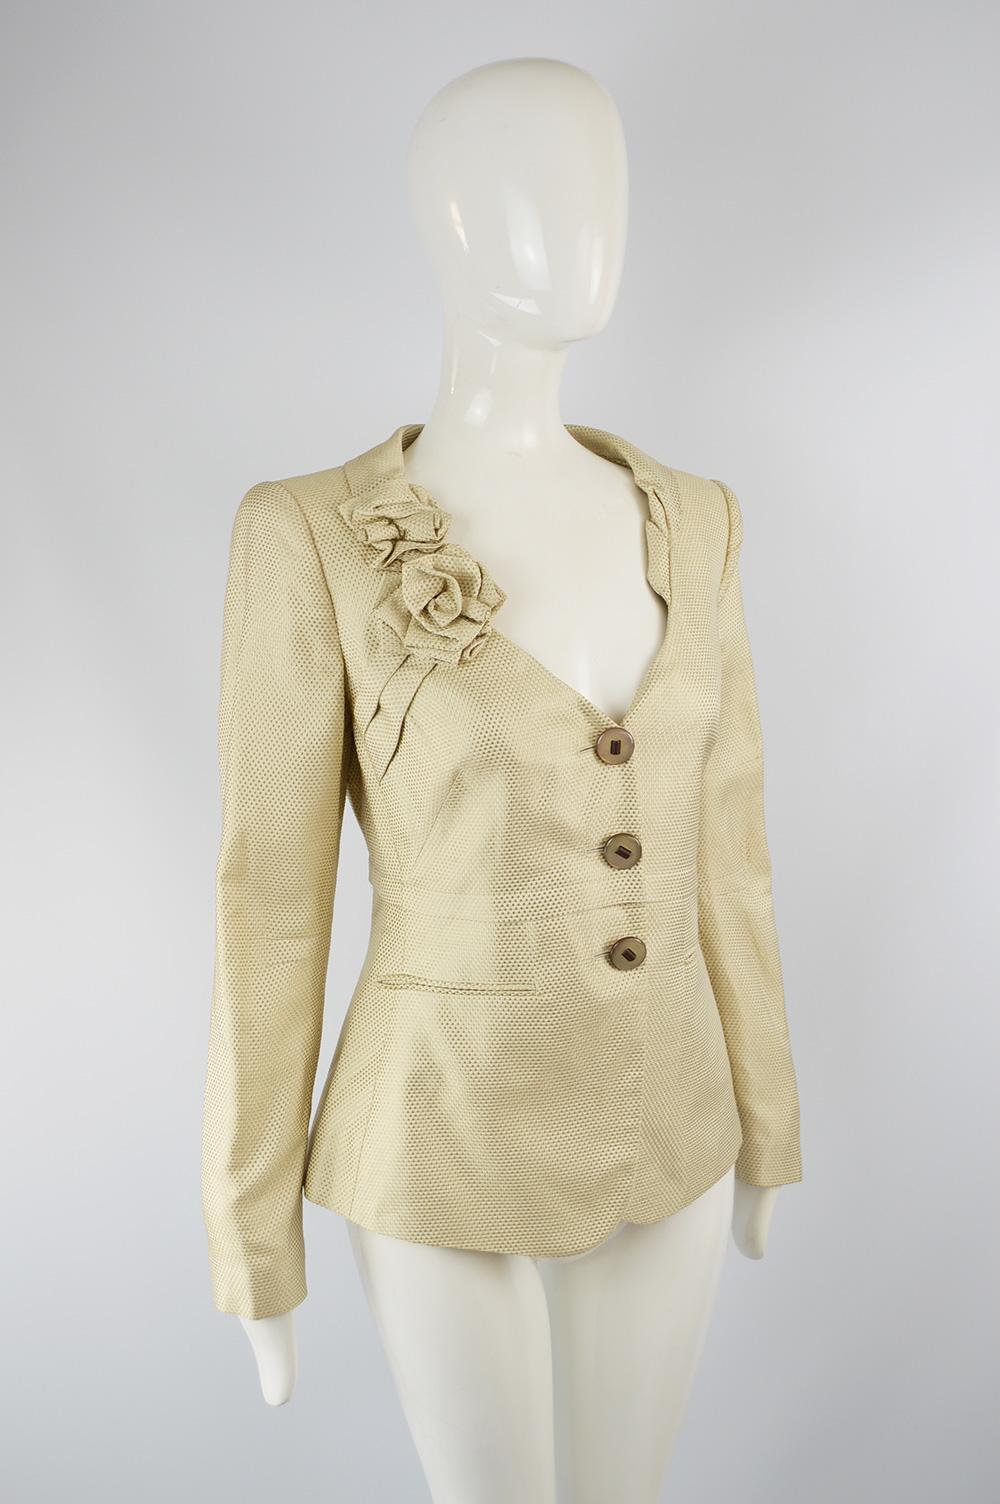 Giorgio Armani Cream Brocade Jacquard Jacket with Origami Flower Lapel In Good Condition In Doncaster, South Yorkshire